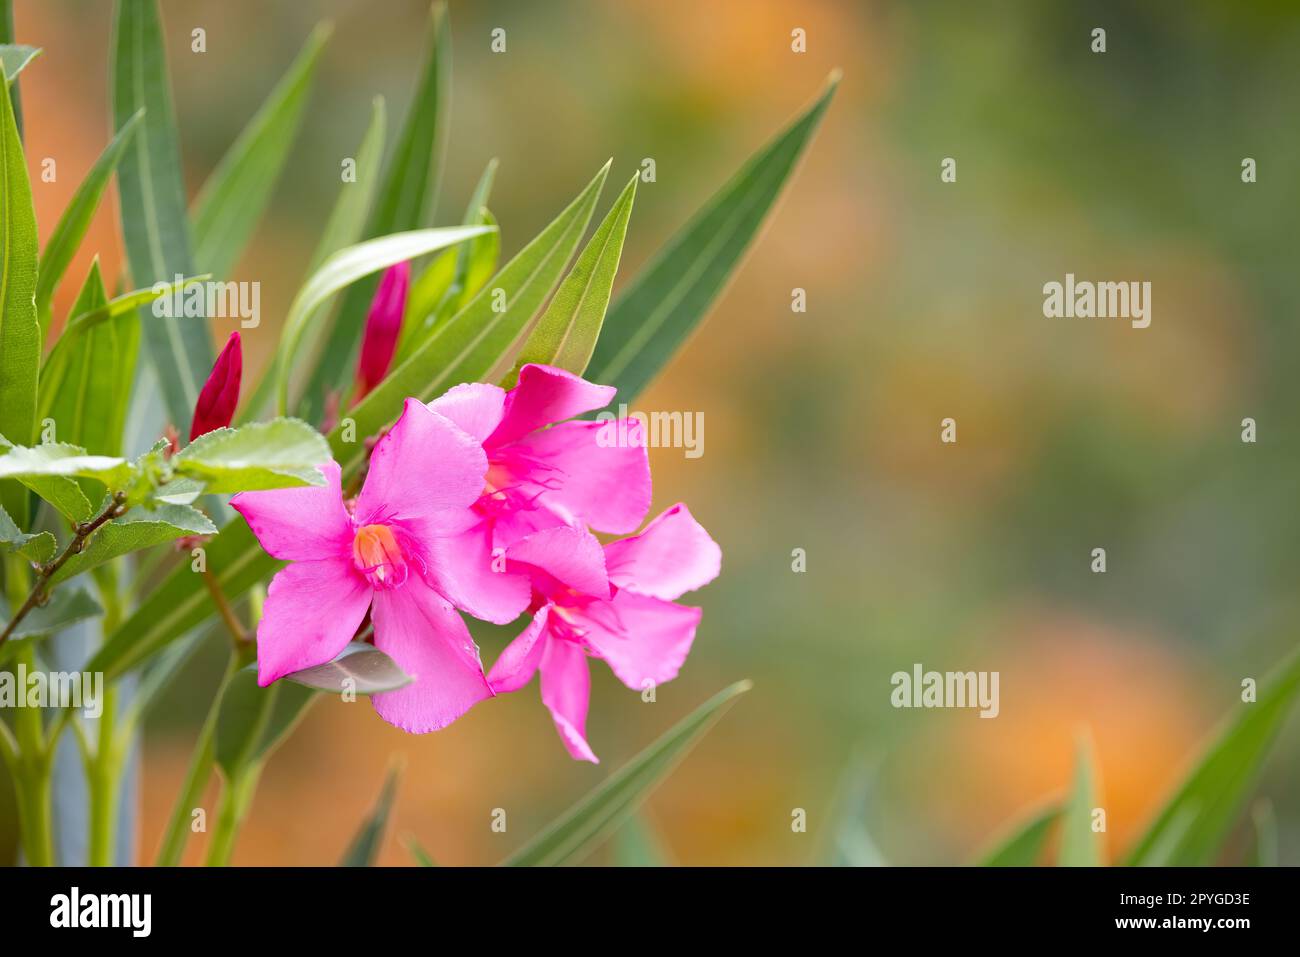 A closeup photo of a beautiful pink oleander flower, with a vibrant color and delicate petals, captured in the Kenyan Tsavo East Reserve Stock Photo